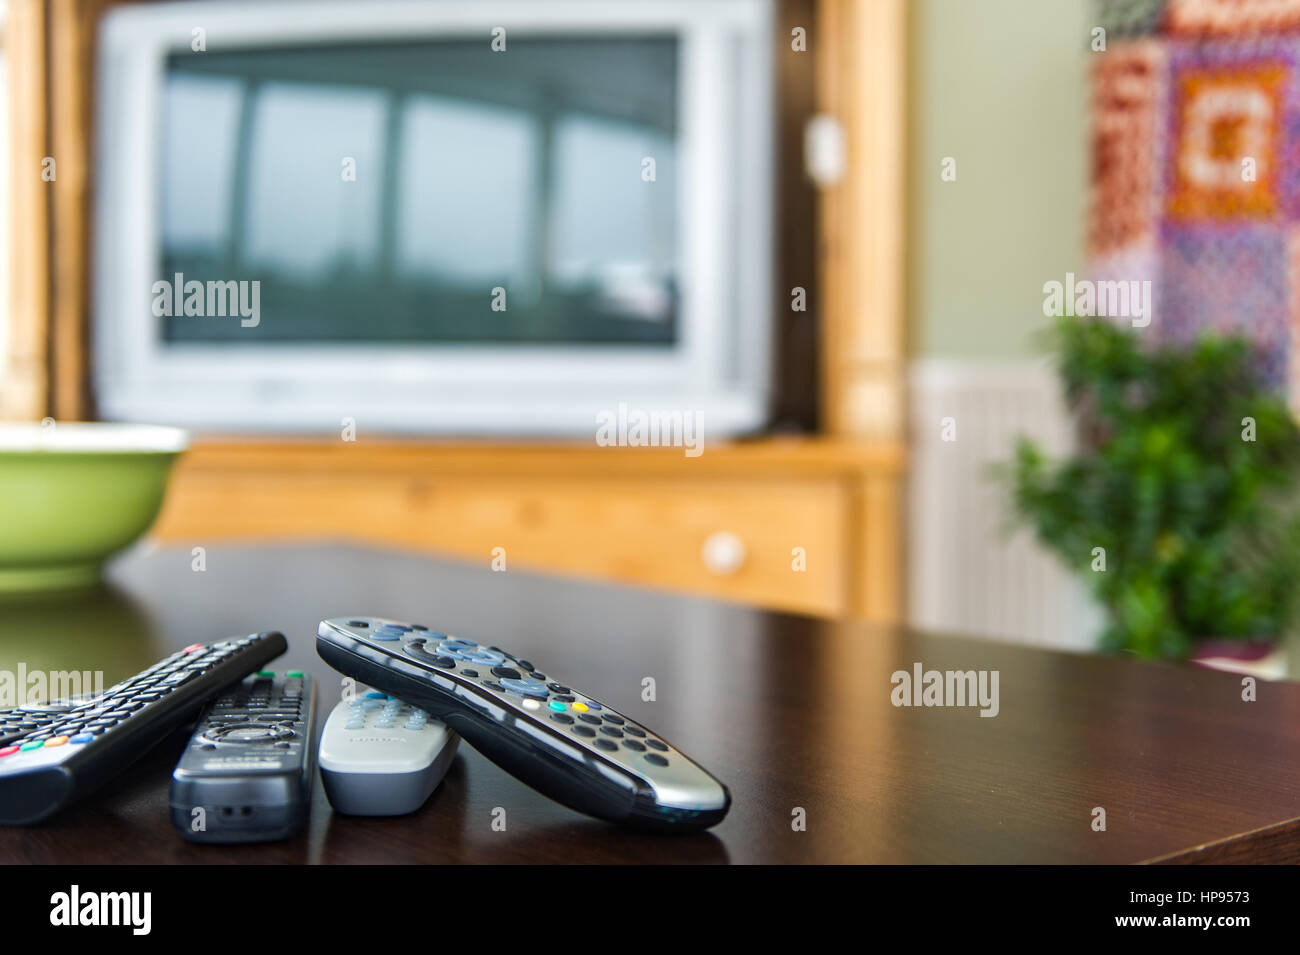 Remote control units on a coffee table in front of a television as a technology concept. Stock Photo